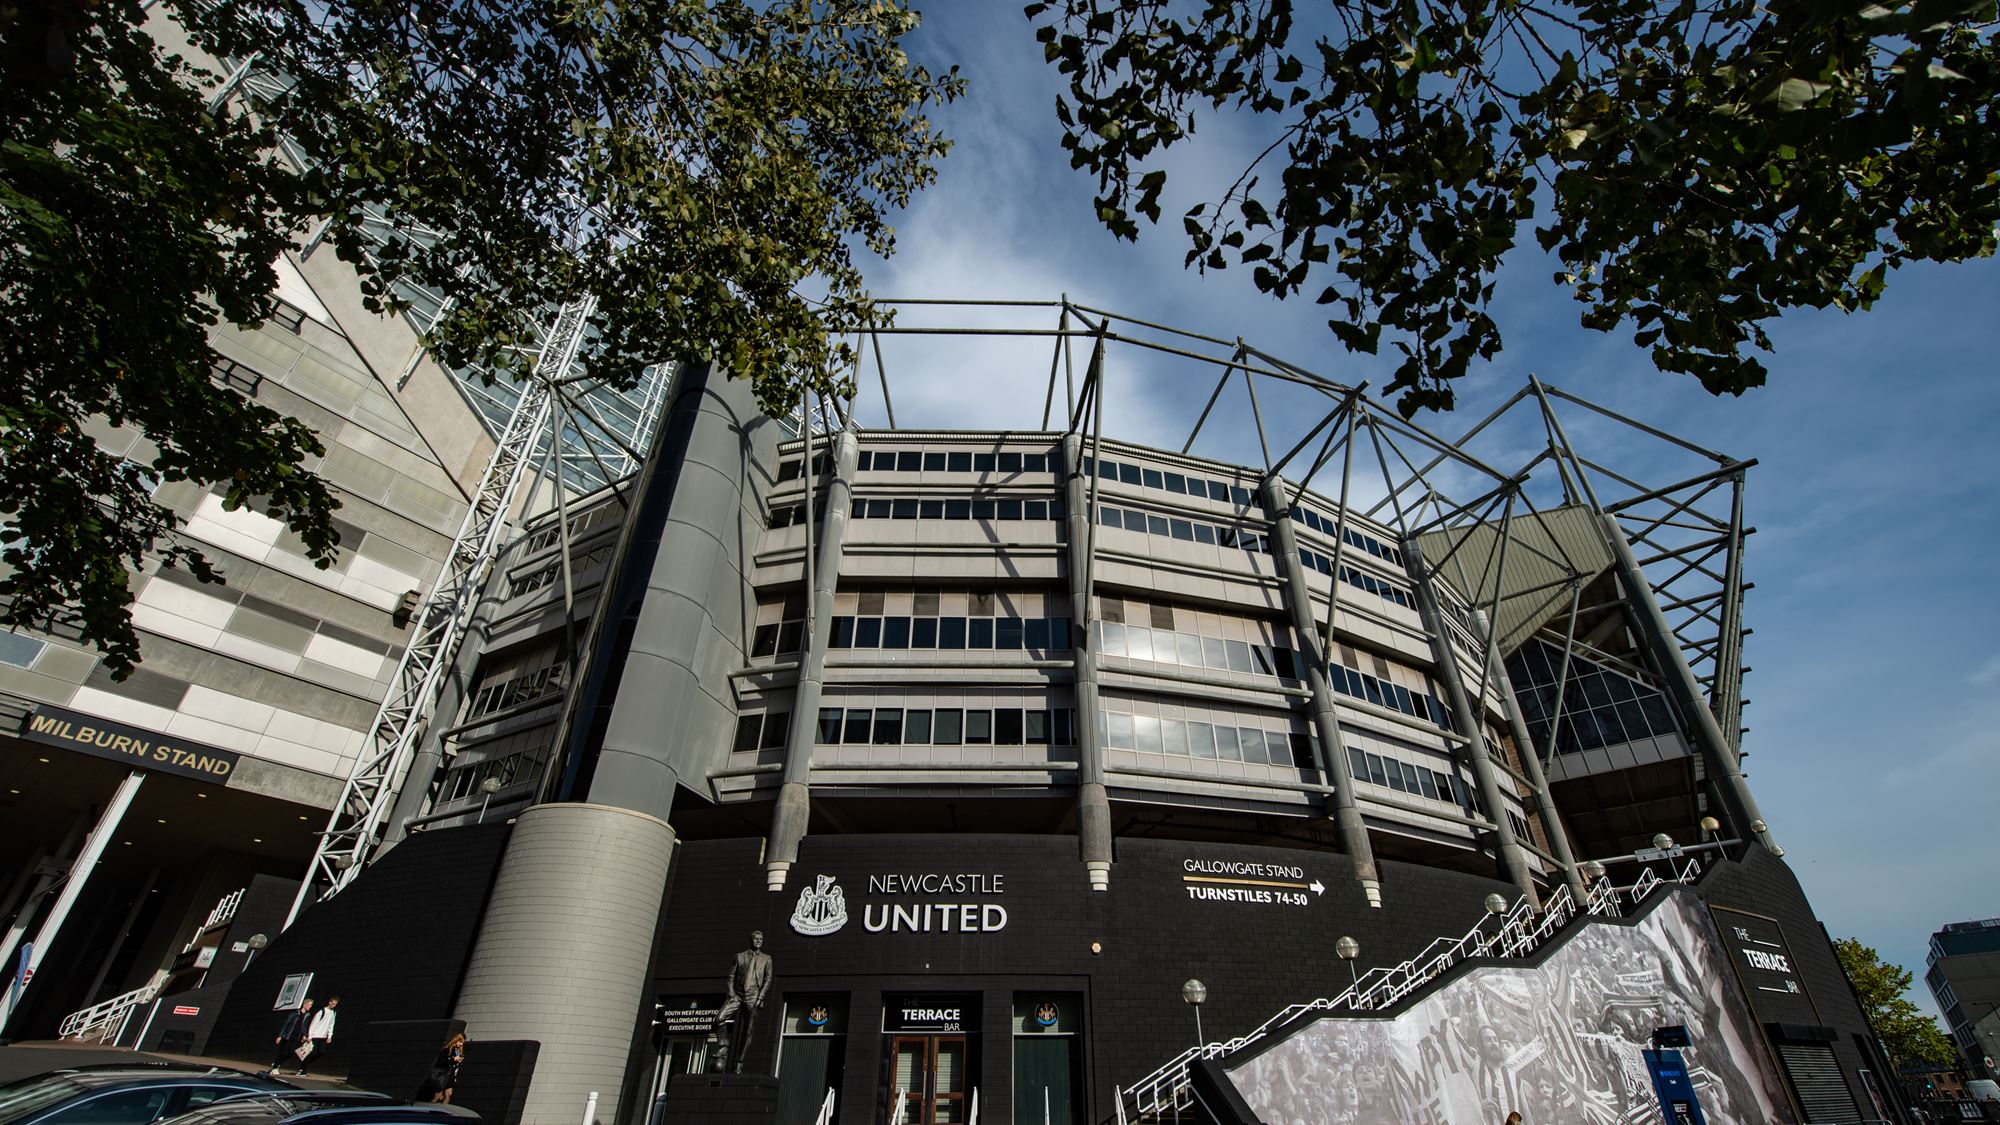 Saudi's PIF set to take over Newcastle United in $407 million deal